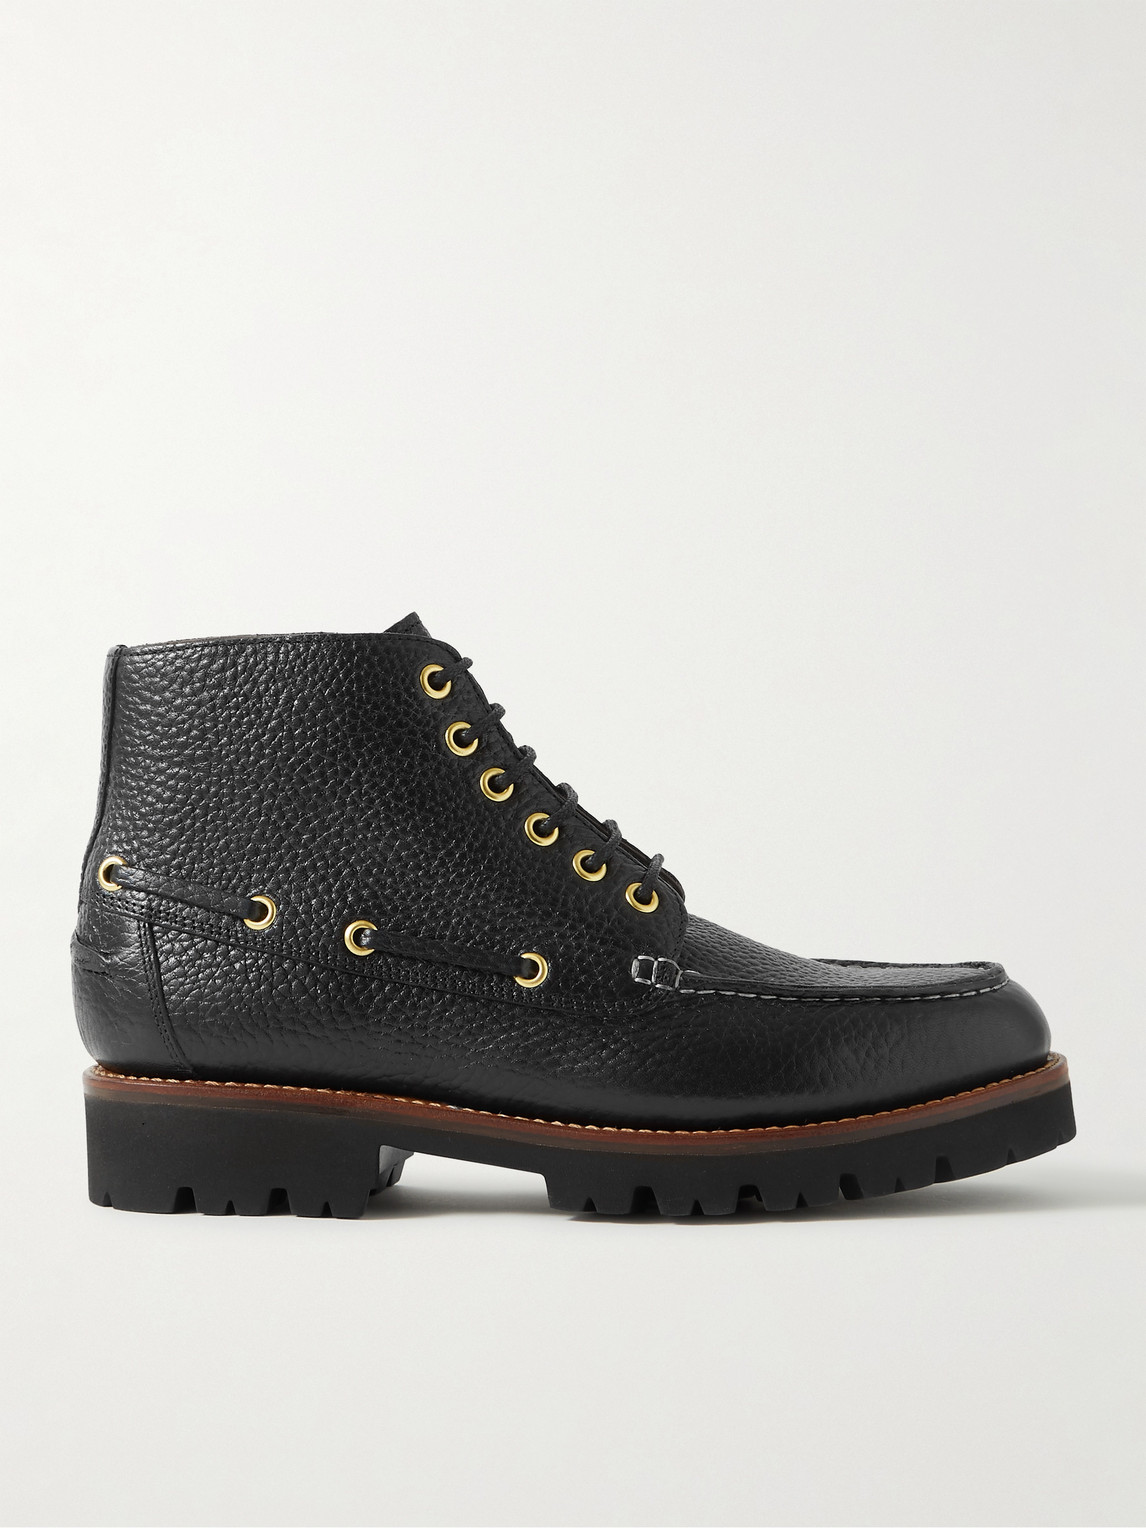 Grenson Black Easton Grained Leather Boots